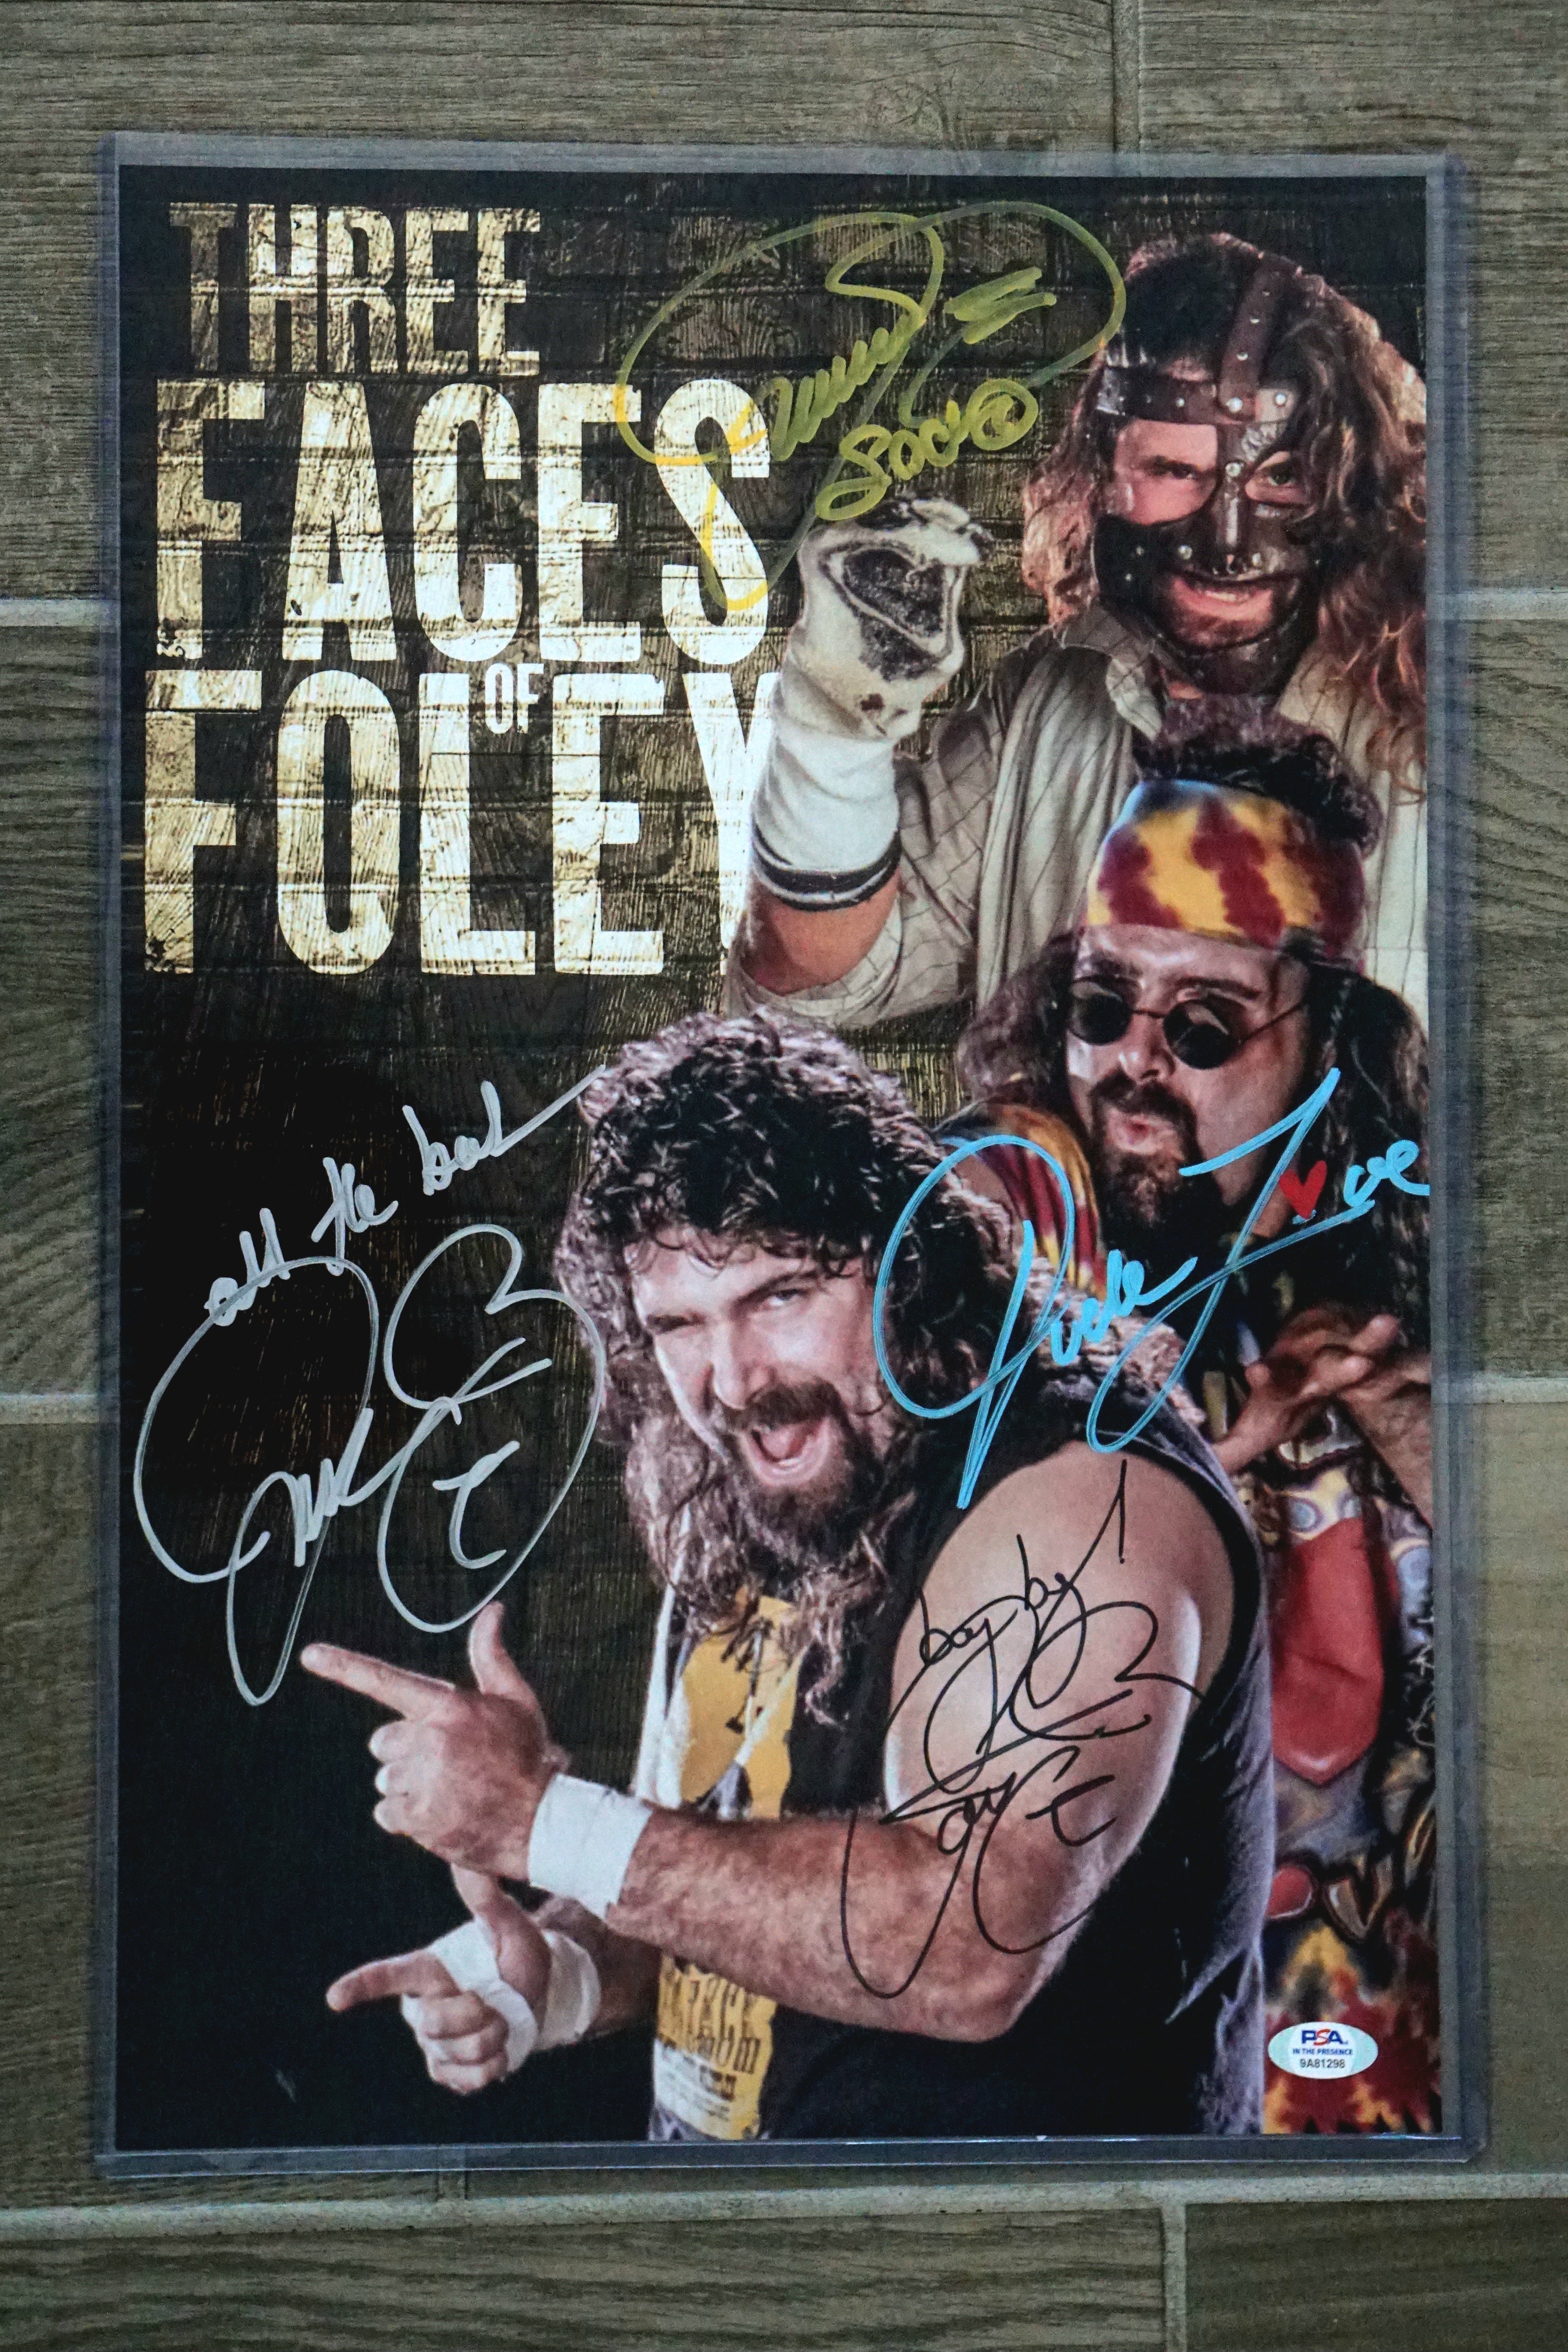 3 Faces of Foley 12x18 Yellow Mankind with inscriptions "Socko" Cactus jack as "Bang bang" Mick Foley as "All the Best" - Signed by Mick Foley by all 3 characters Mankind, Dude, Love Cactus Jack